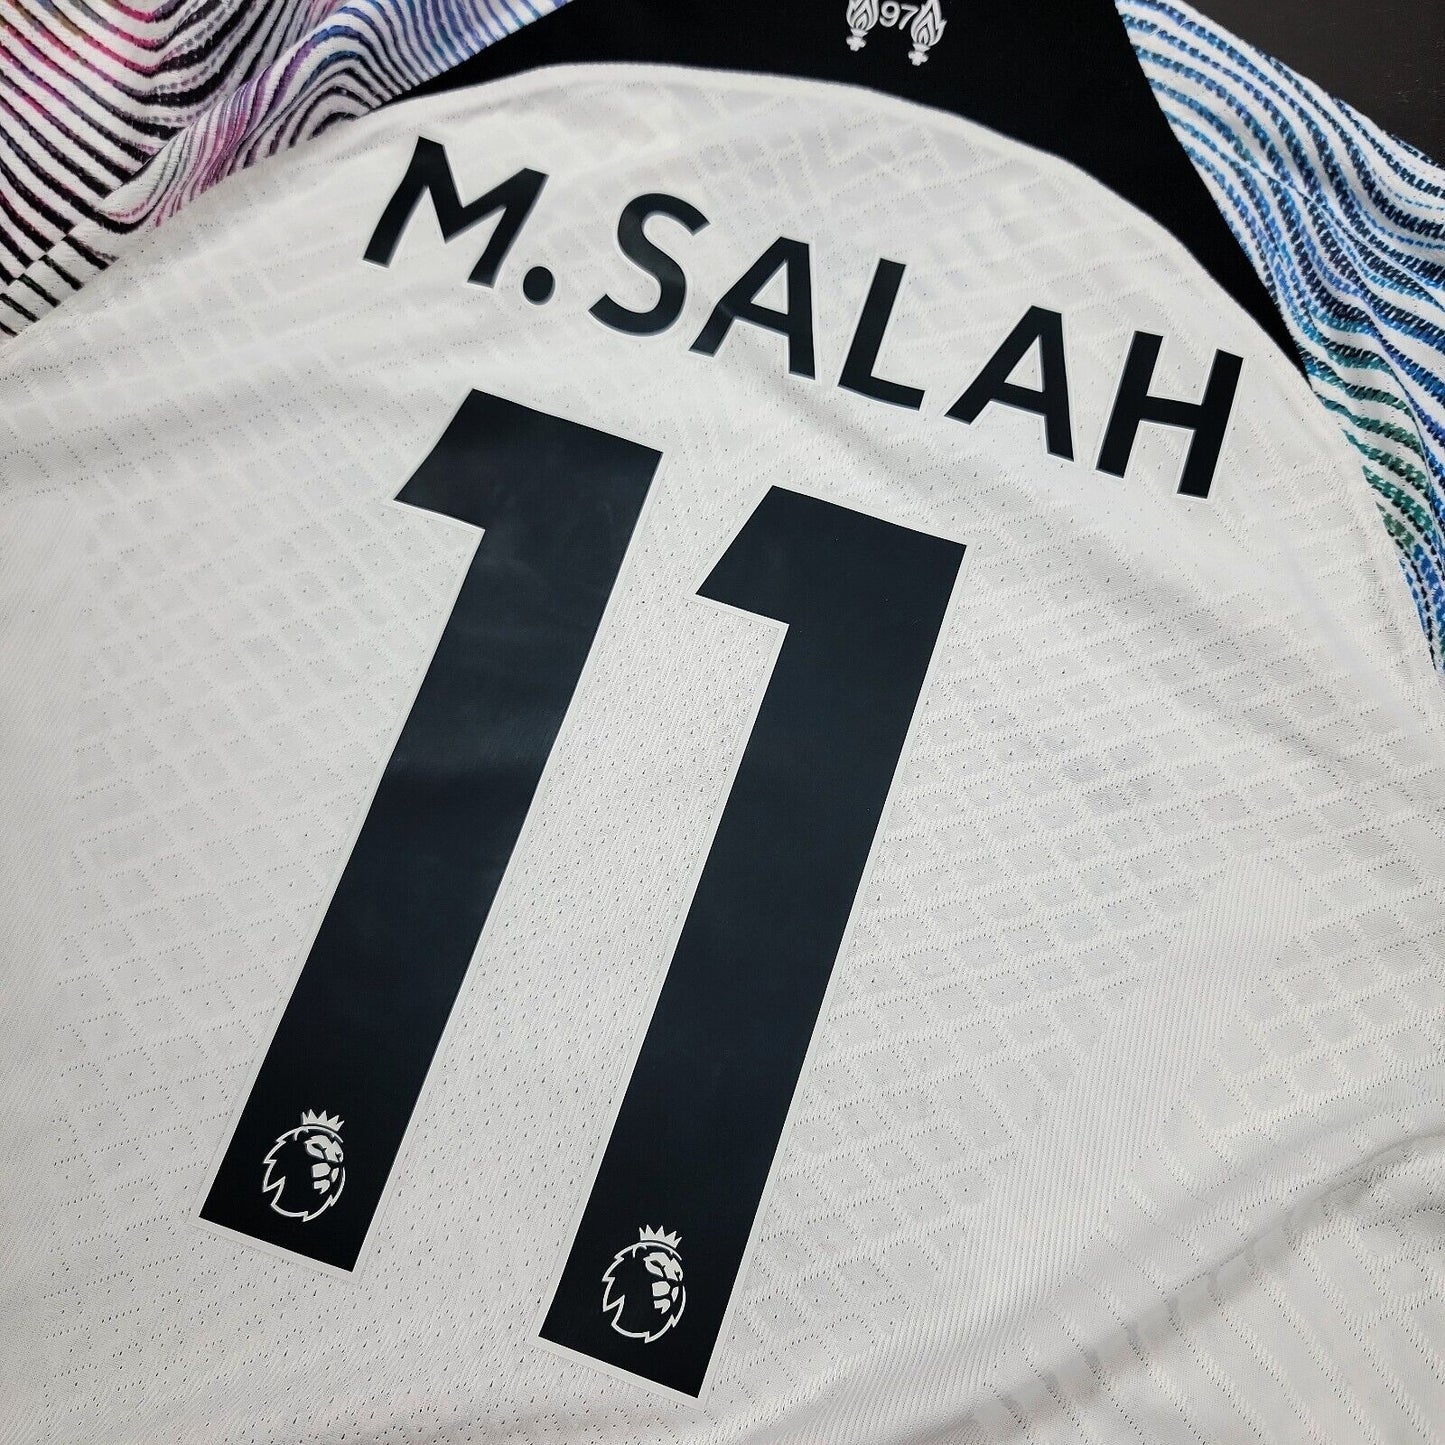 100% Authentic Mohamed Salah Nike Liverpool Jersey Size L Mens